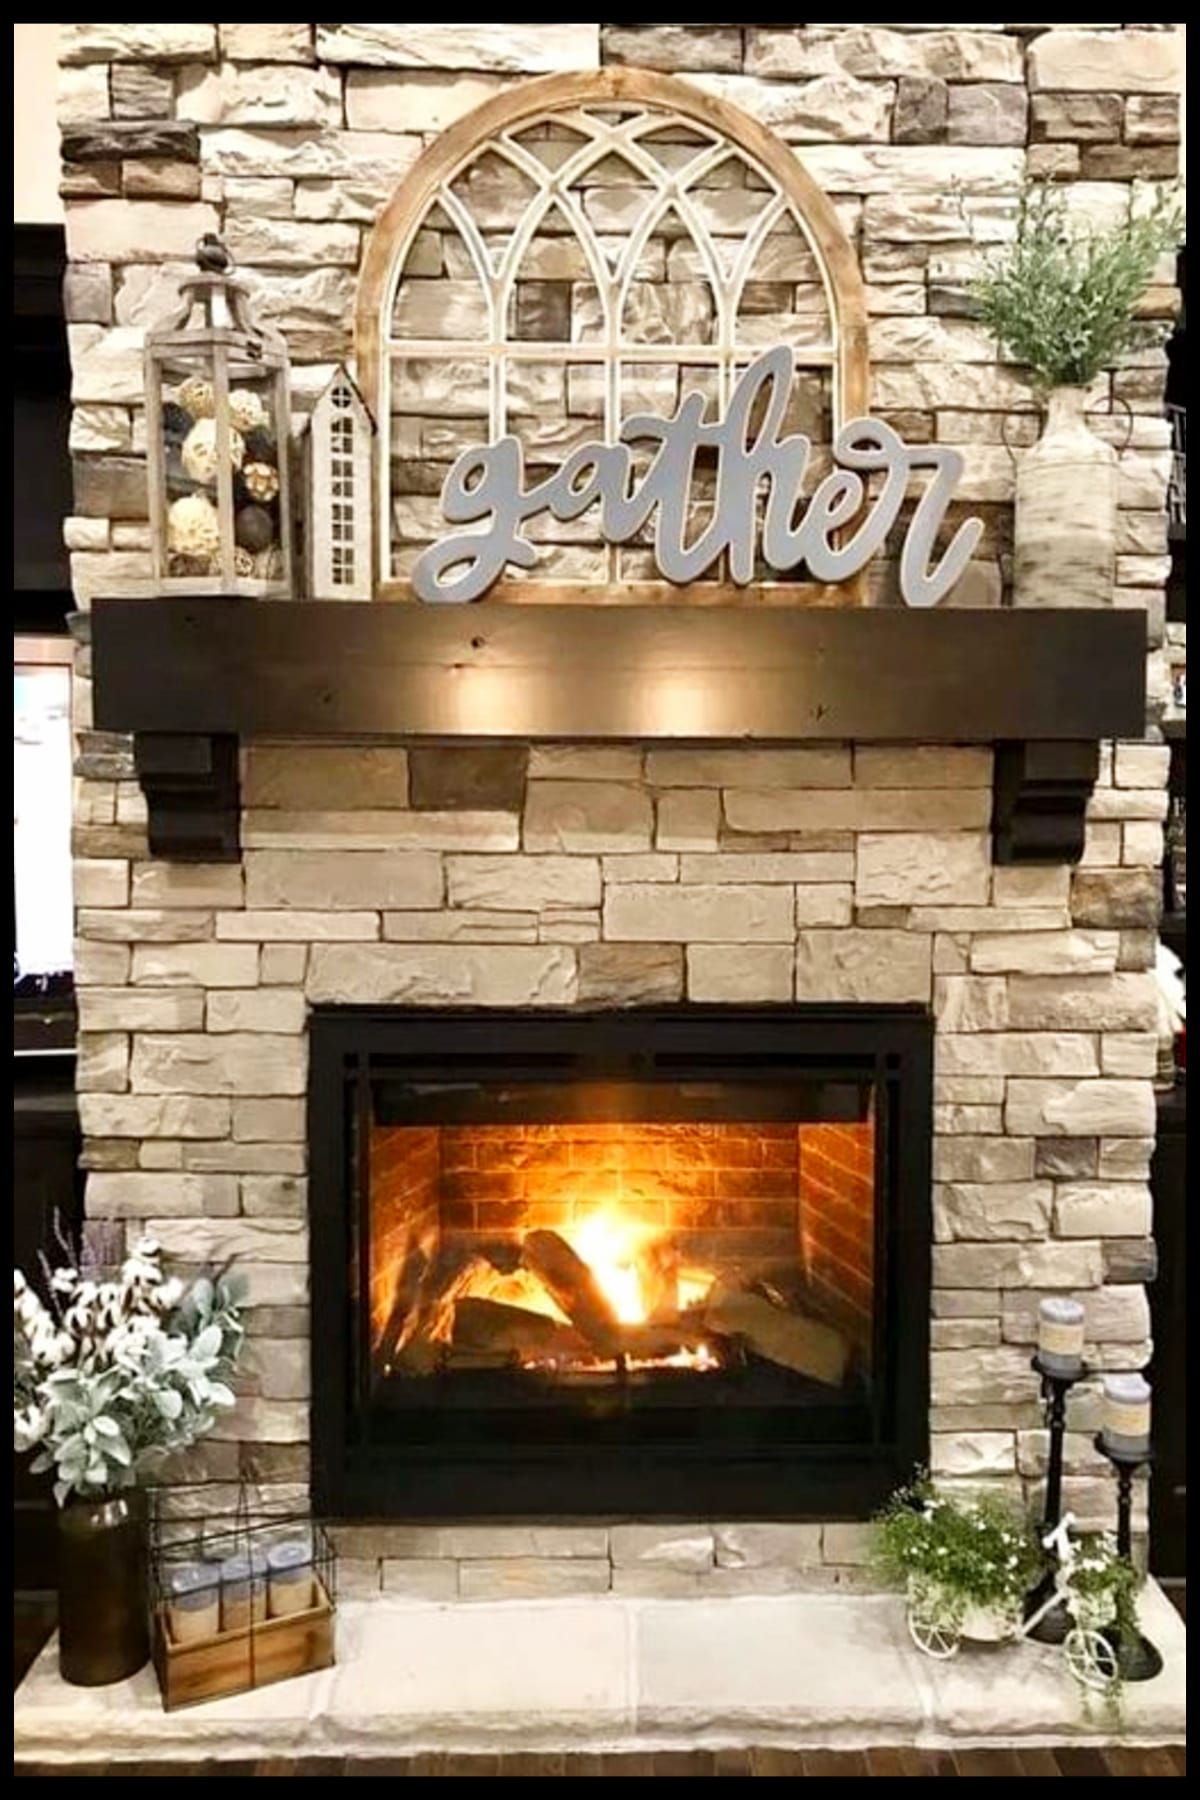 farmhouse fireplace ideas with stacked rock wall, big Gather sign on mantel and rustic decor items on hearth